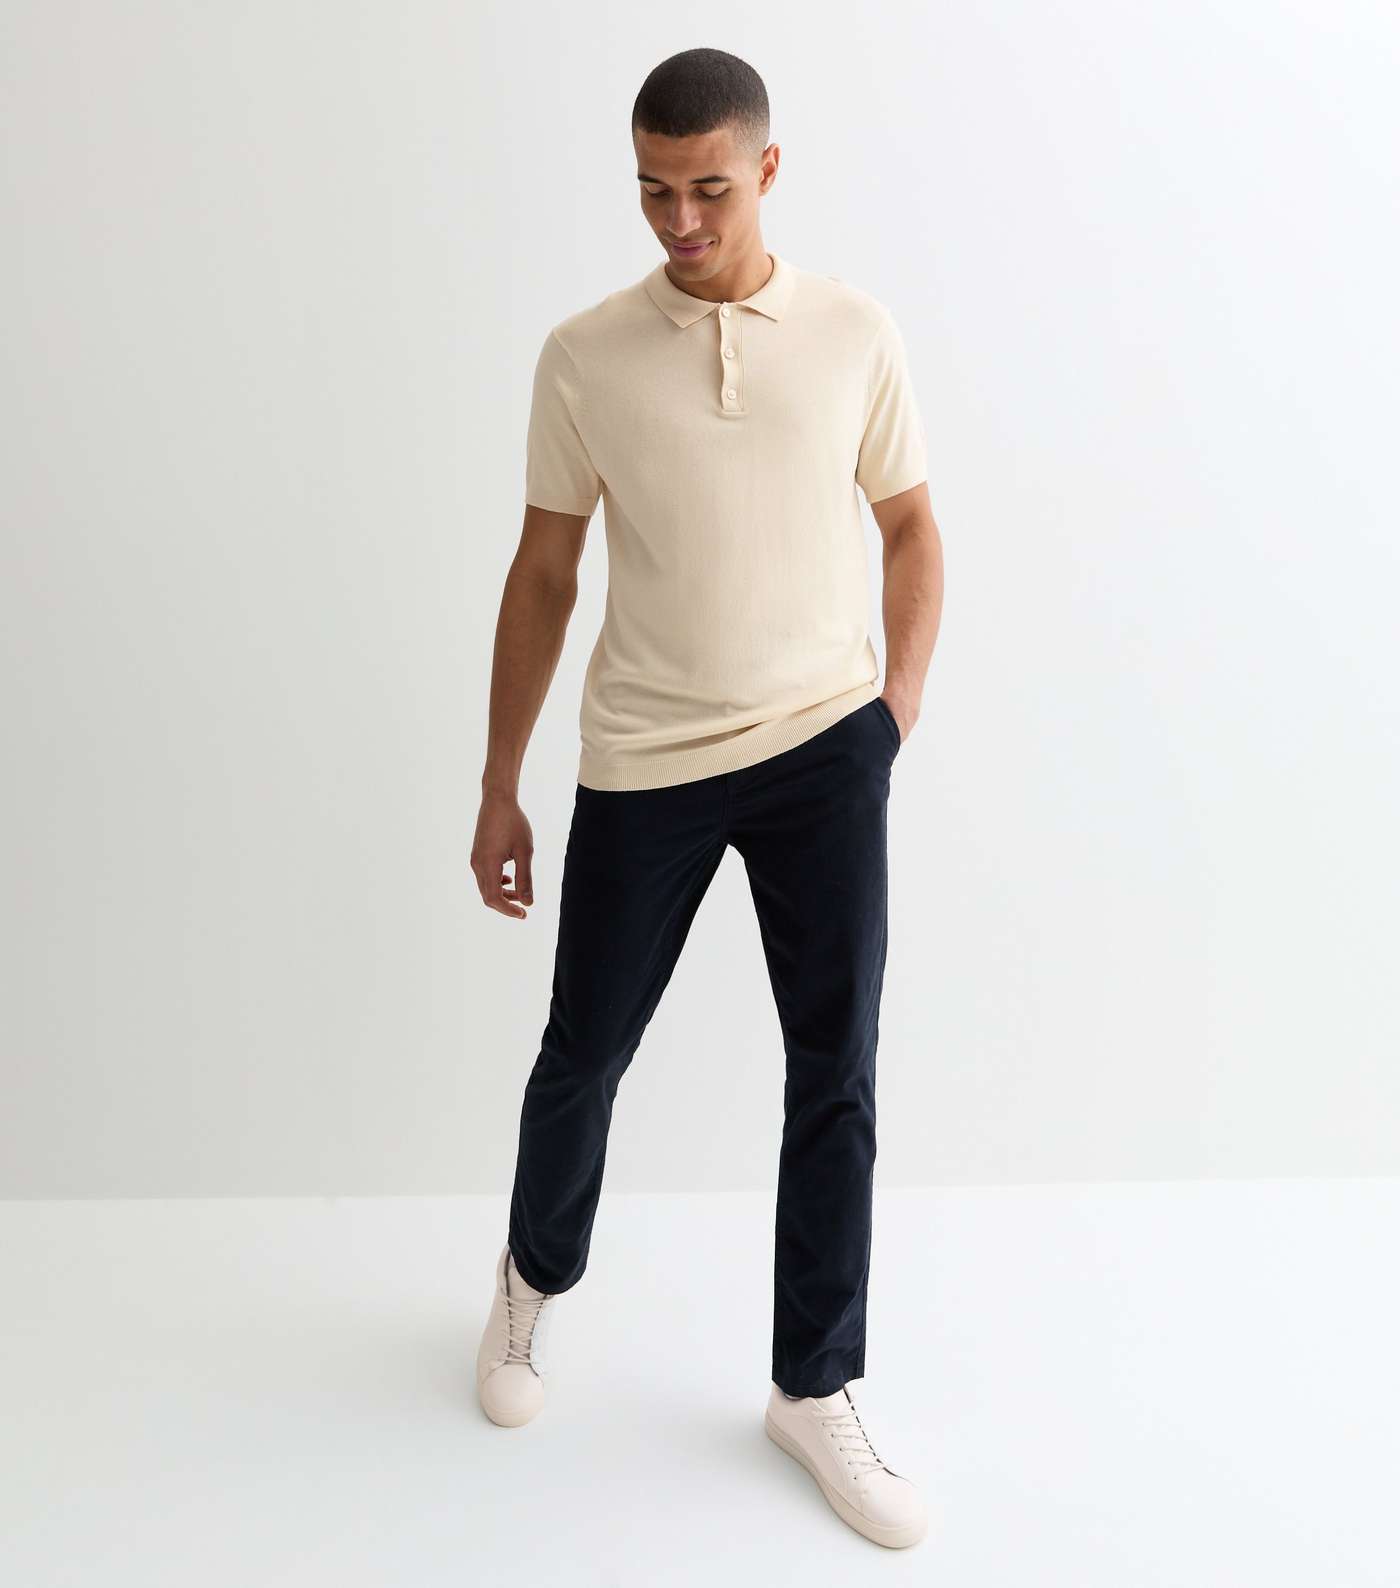 Off White Fine Knit Slim Fit Polo Top Image 3